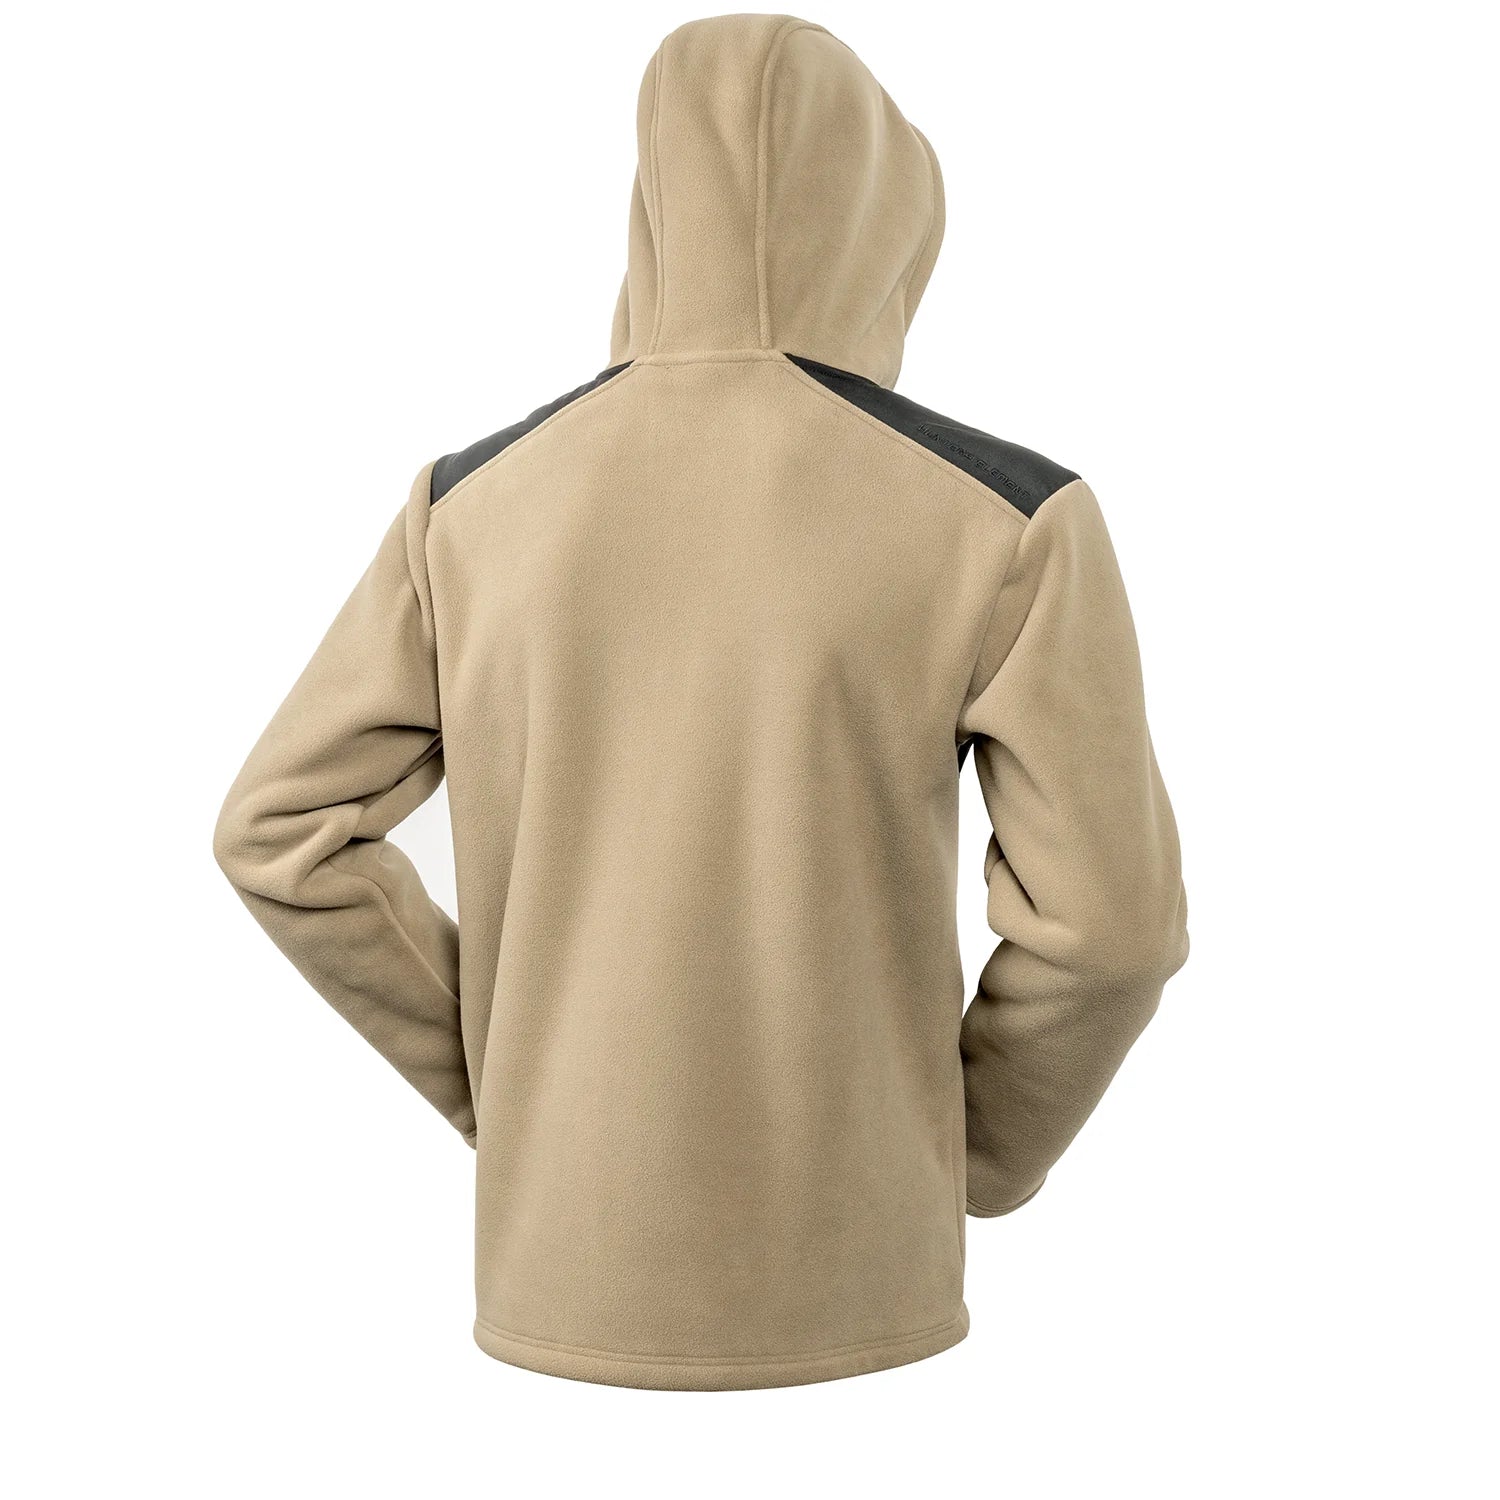 Hunters Element Furnace Hoodie -  - Mansfield Hunting & Fishing - Products to prepare for Corona Virus